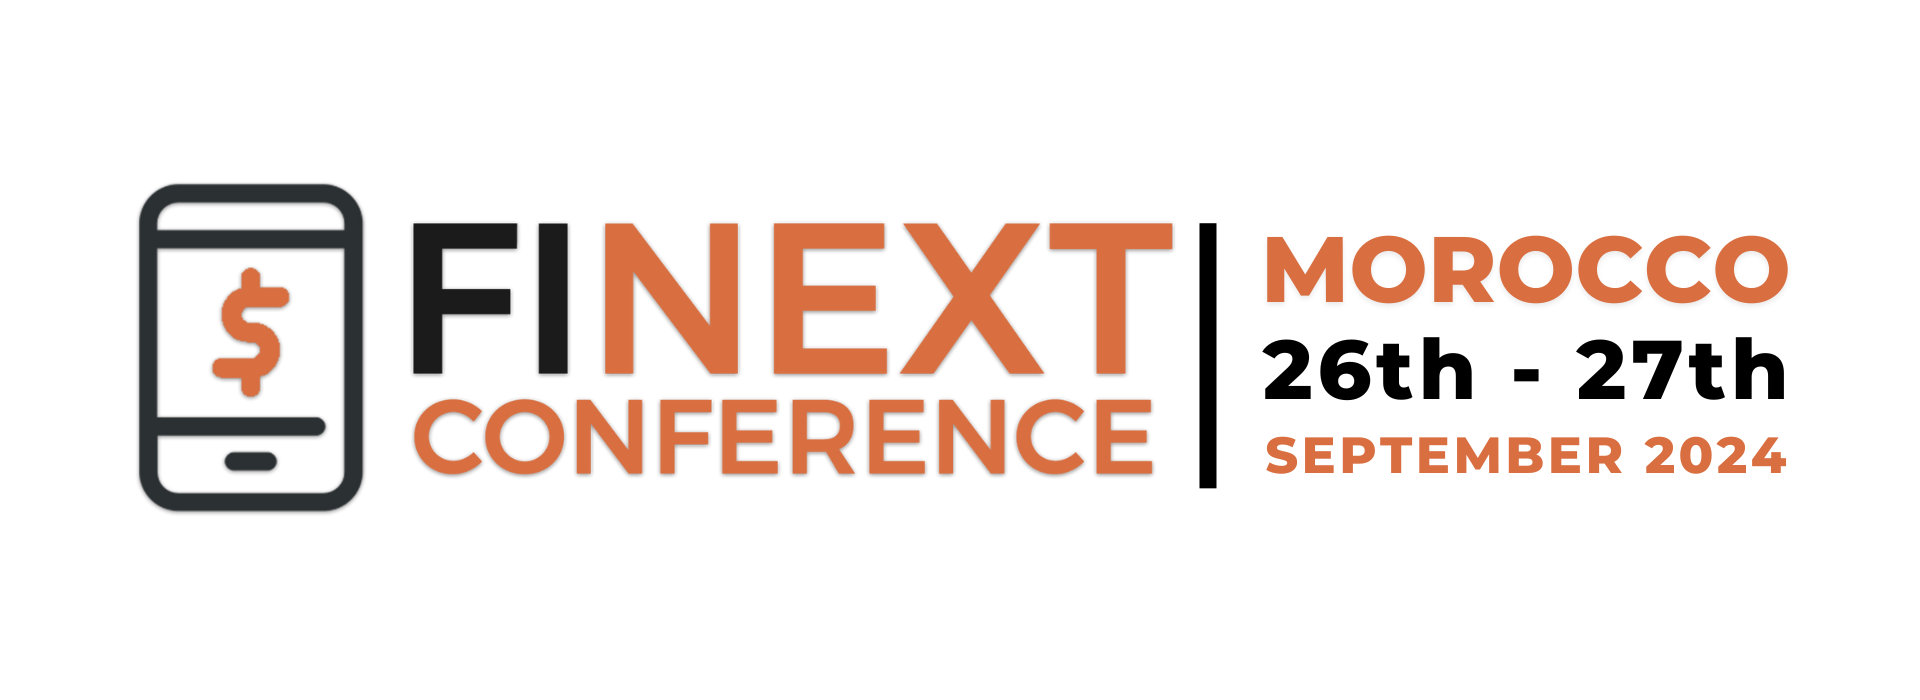 FiNext Conference